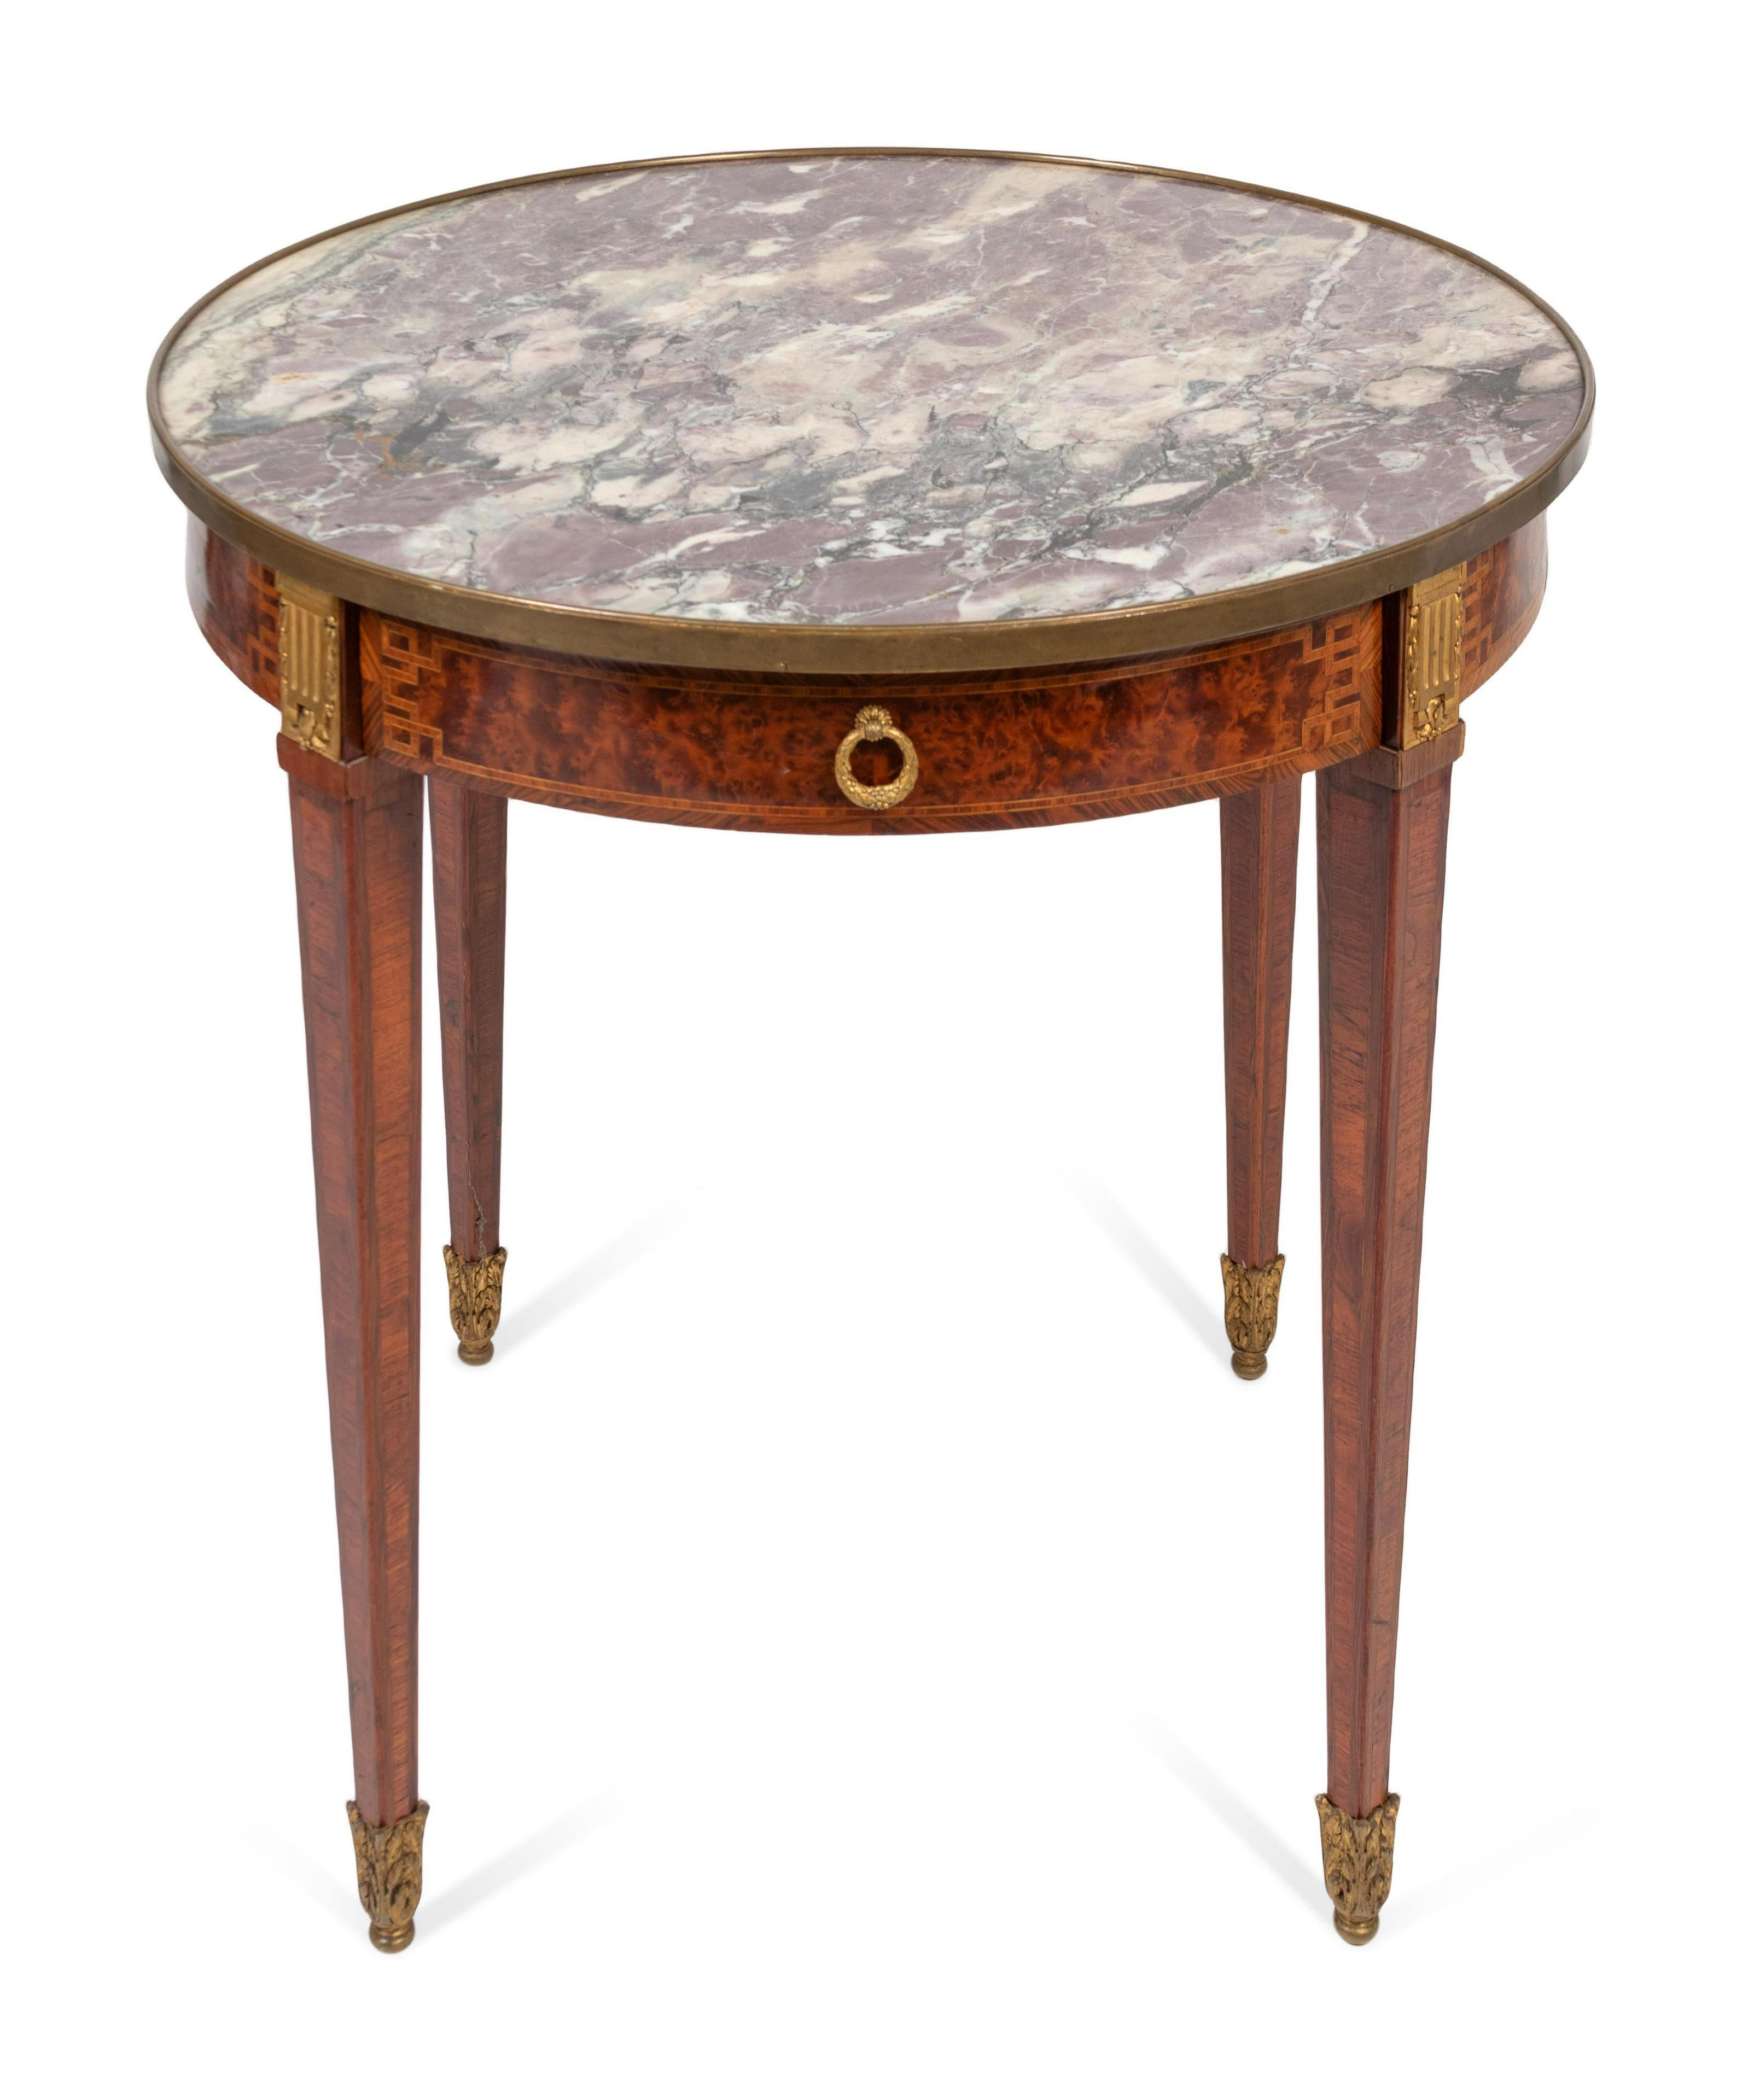 A very fine and striking Louis XVI style marquetry inlaid and Breche Violette marble top Bouillotte table, France, circa 1880
Dimensions: Height 27 1/2